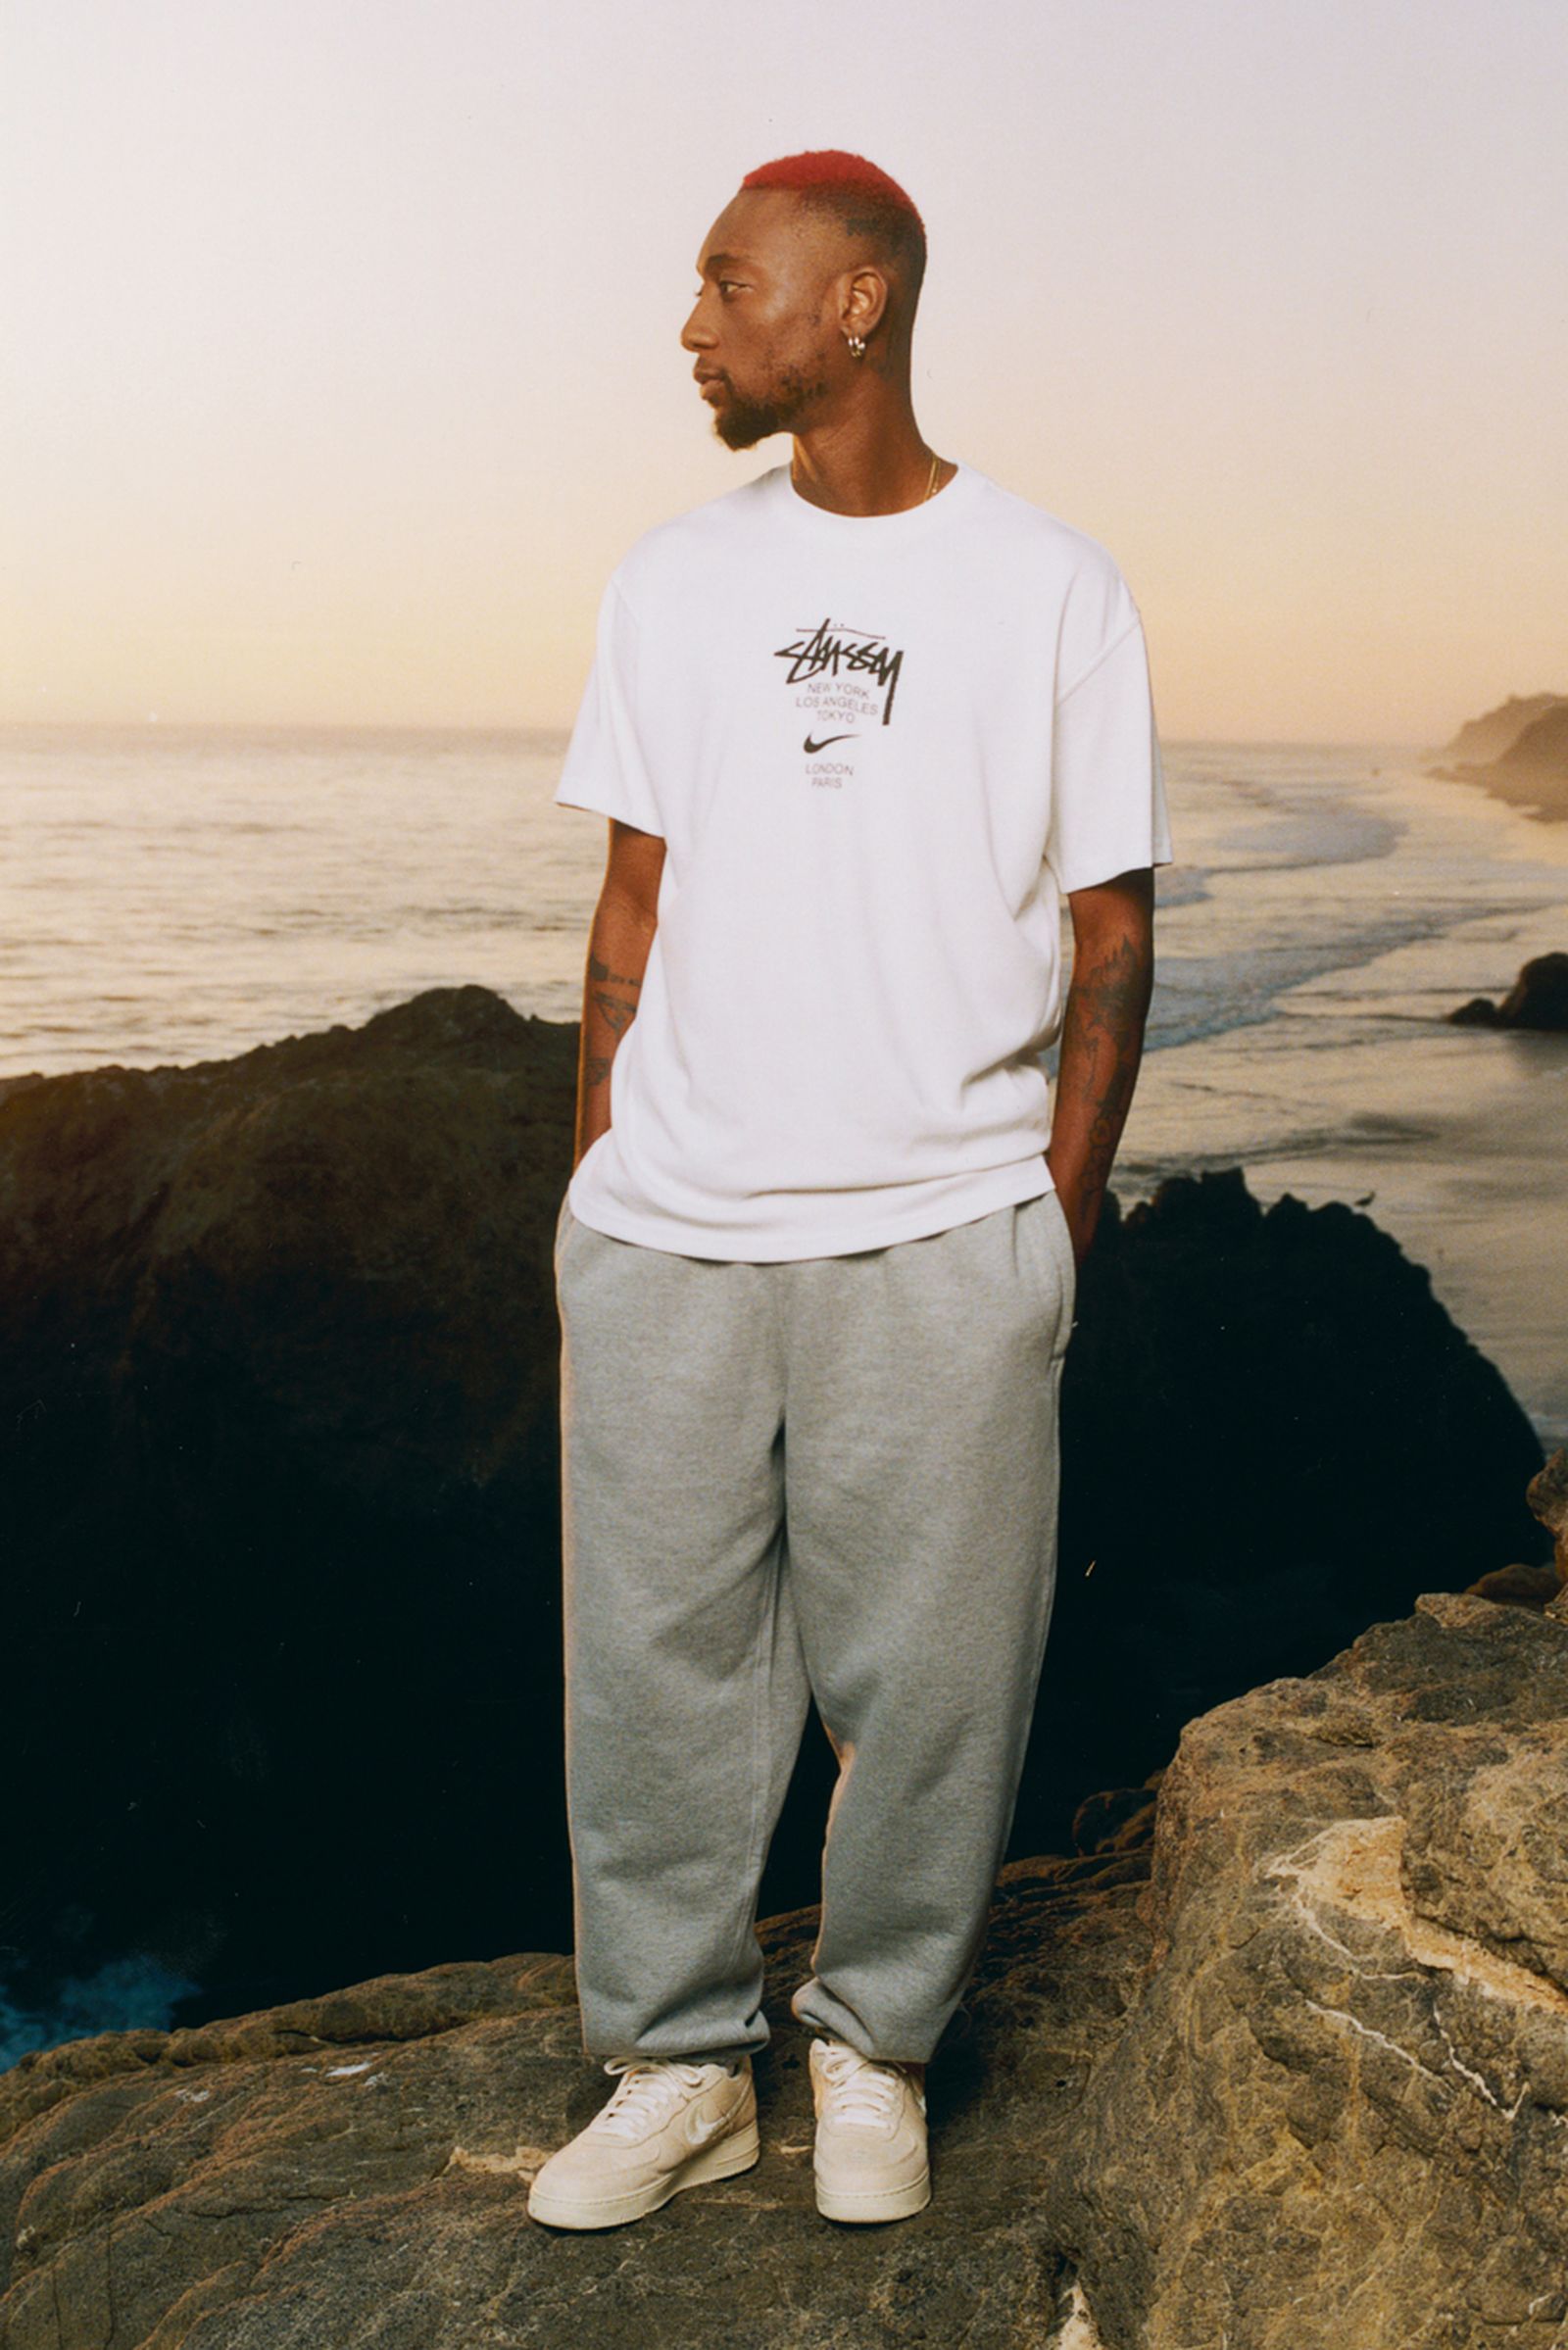 Stüssy x Nike Air Force 1 Apparel Collection: Official Look